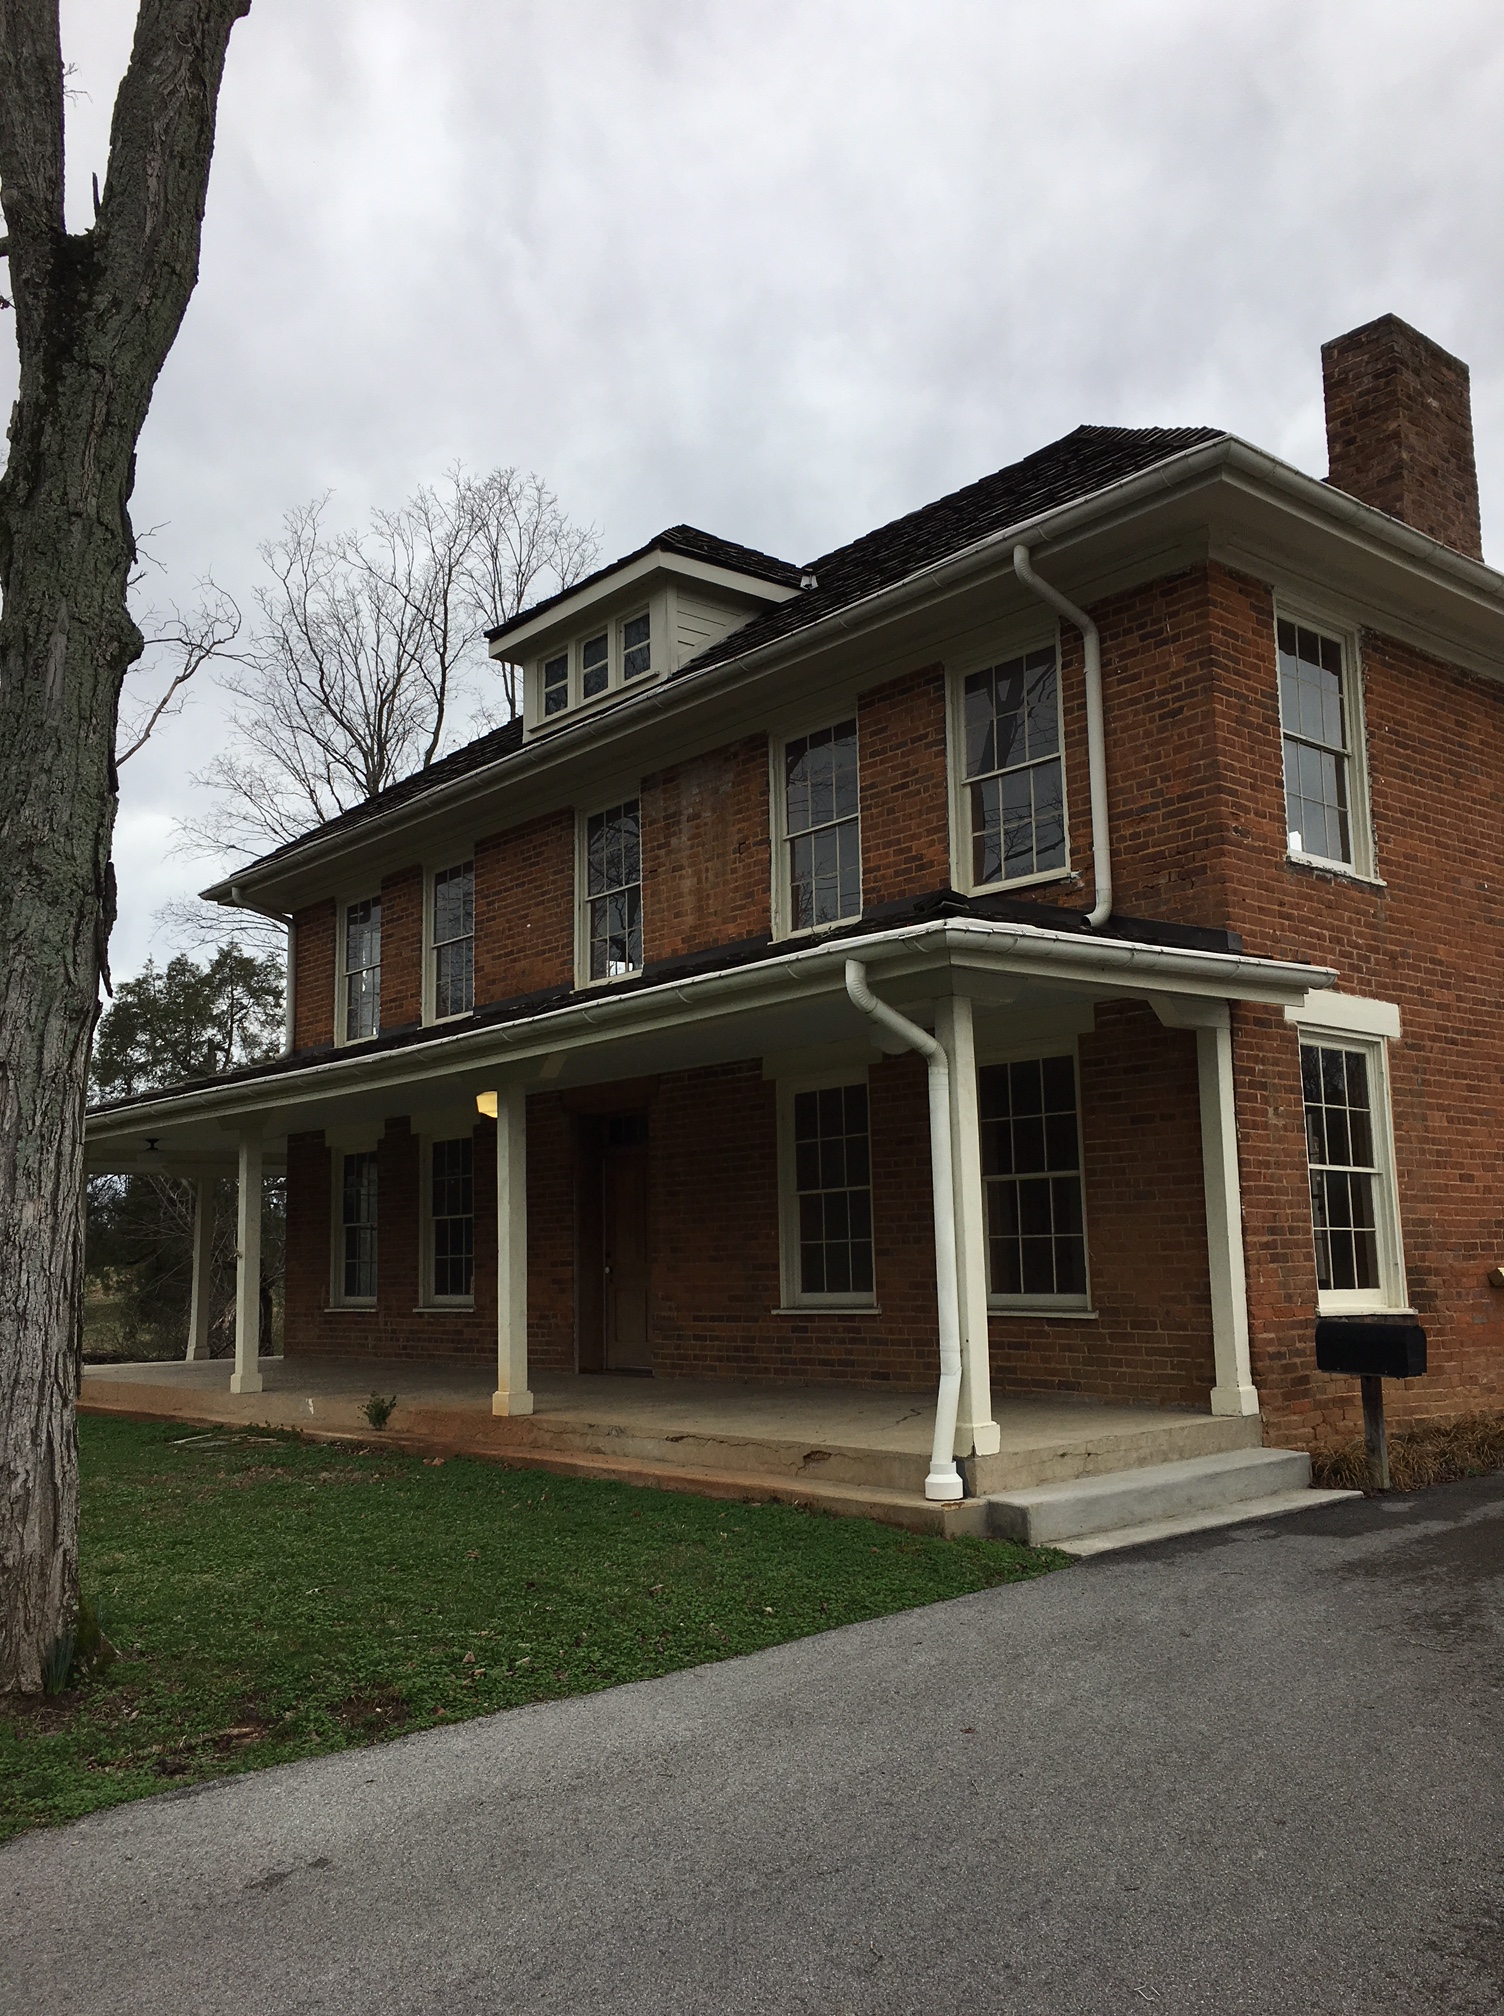 The Lones-Dowell house located on Middlebrook Pike at Weisgarber Road. First constructed in the late 1850s from handmade bricks fashioned on the property.